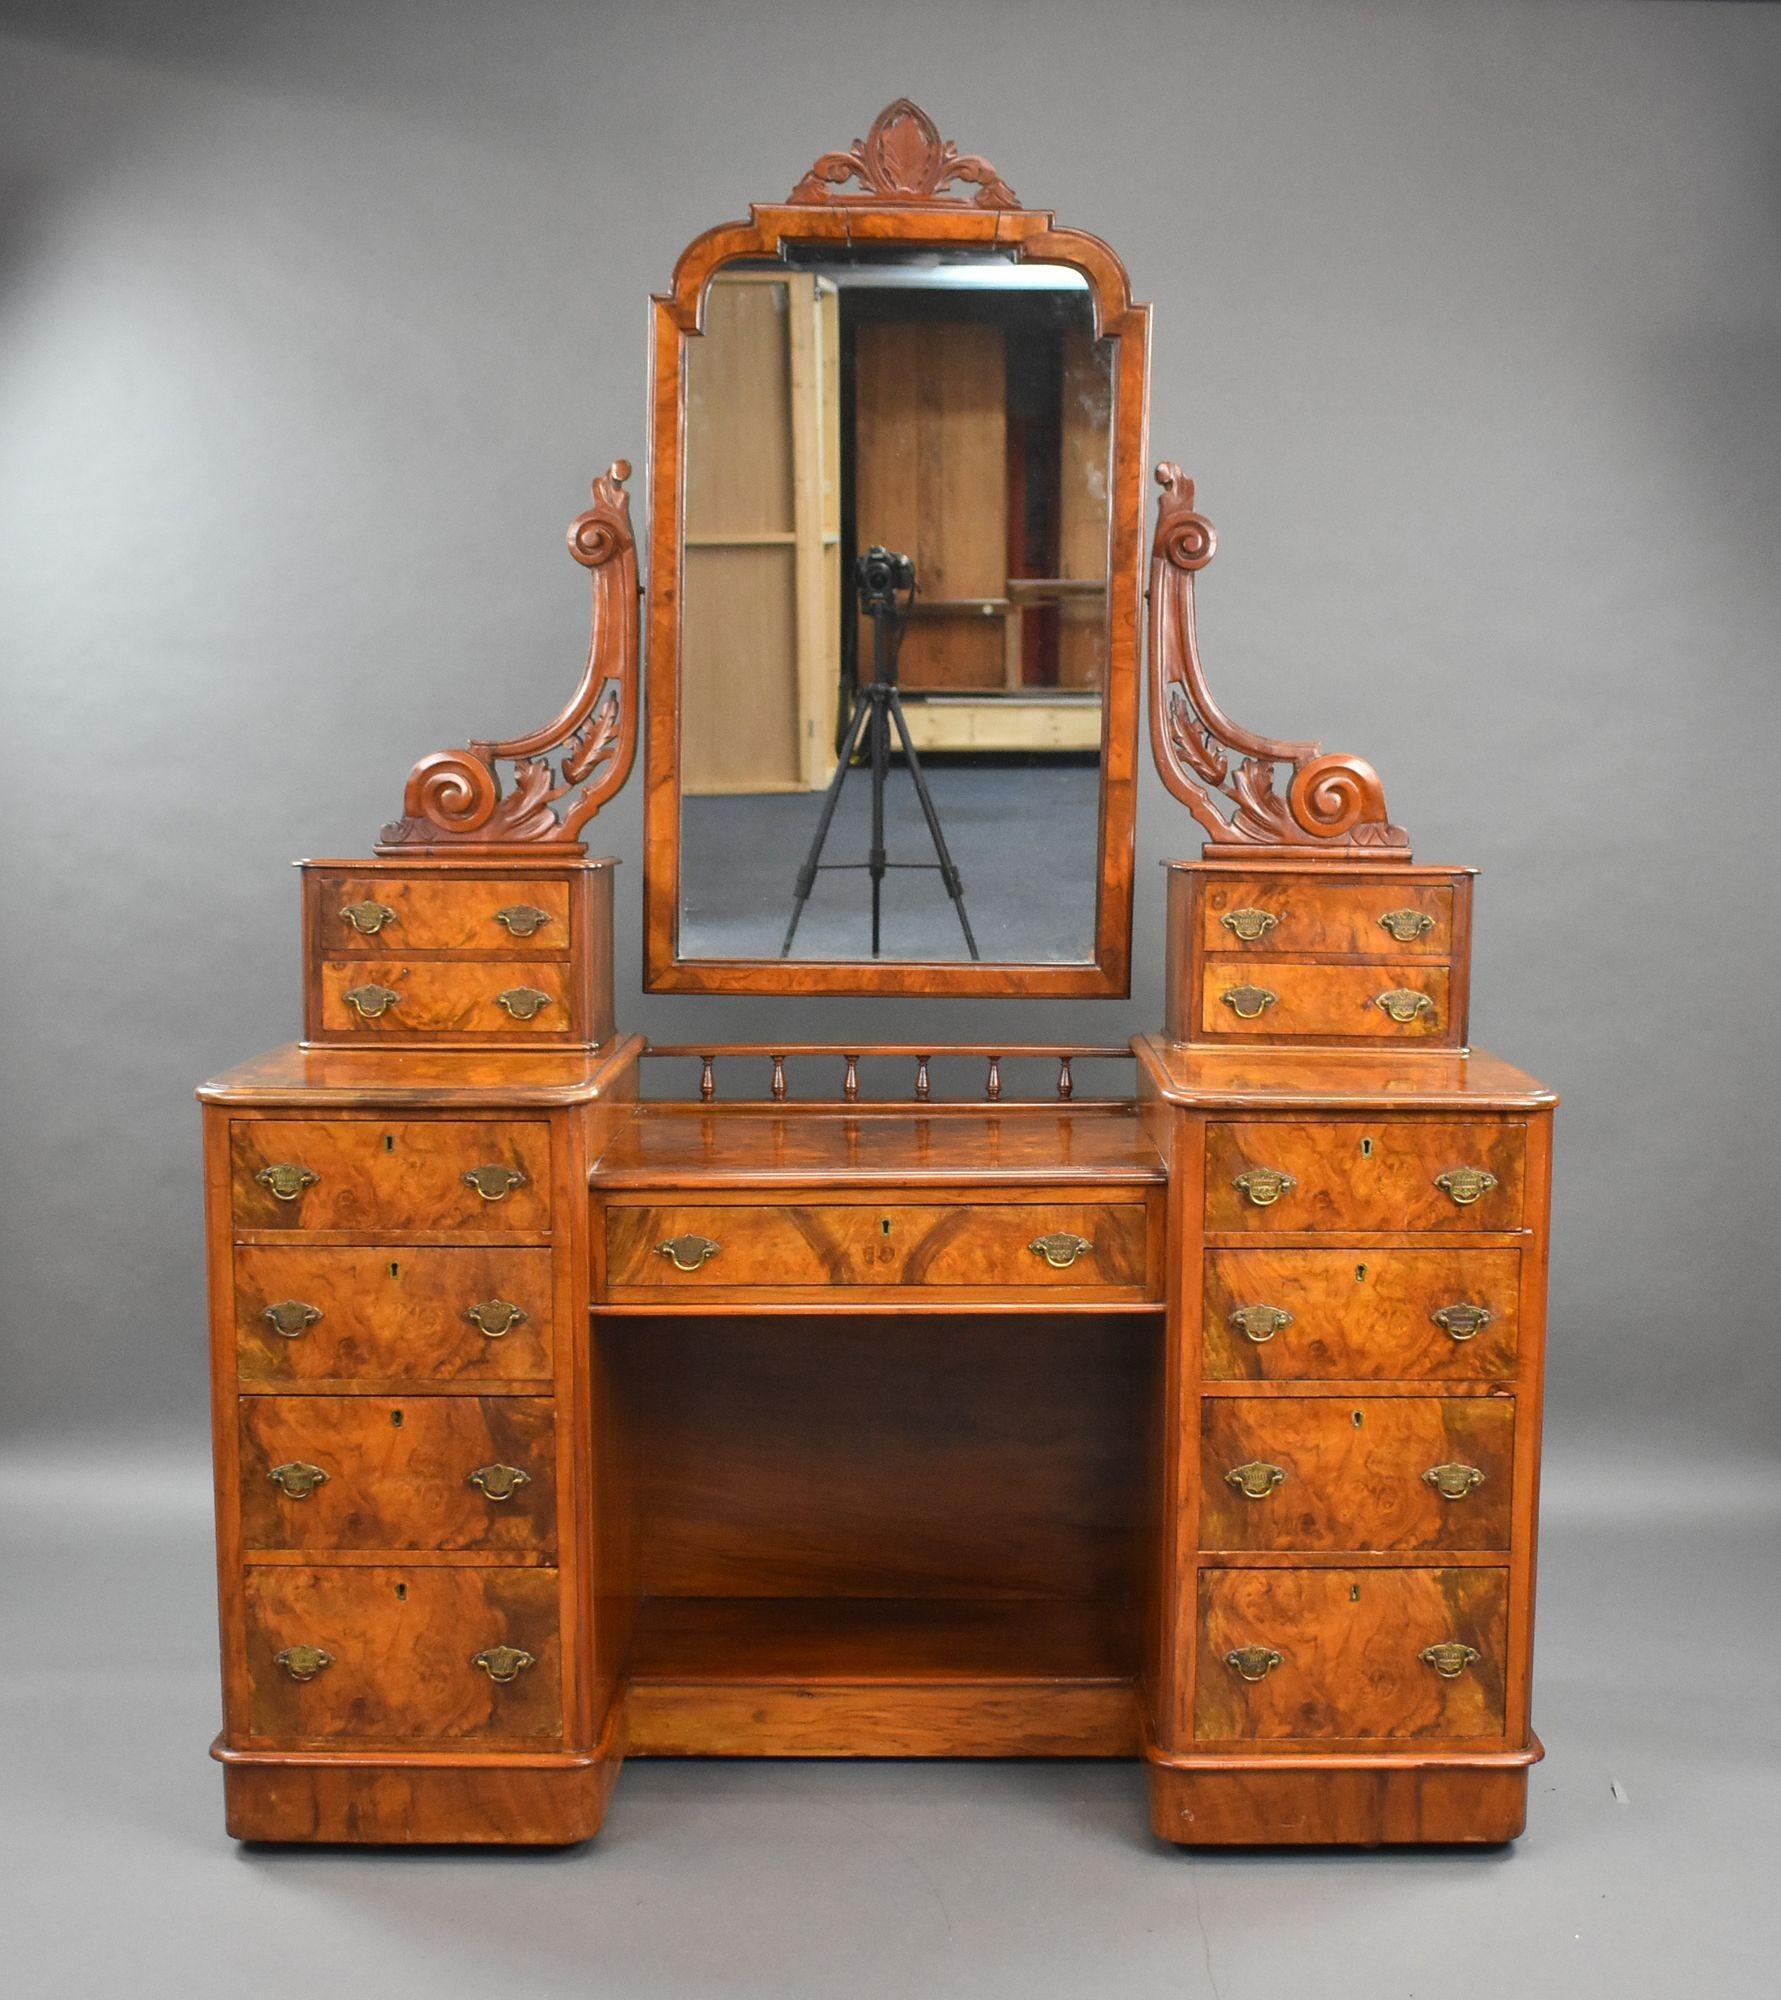 For sale is a good quality Victorian burr walnut dressing table, having a central mirror with elaborately carved supports, having two sets of small drawers above a further four graduated drawers on either side, above a plinth base. The dressing